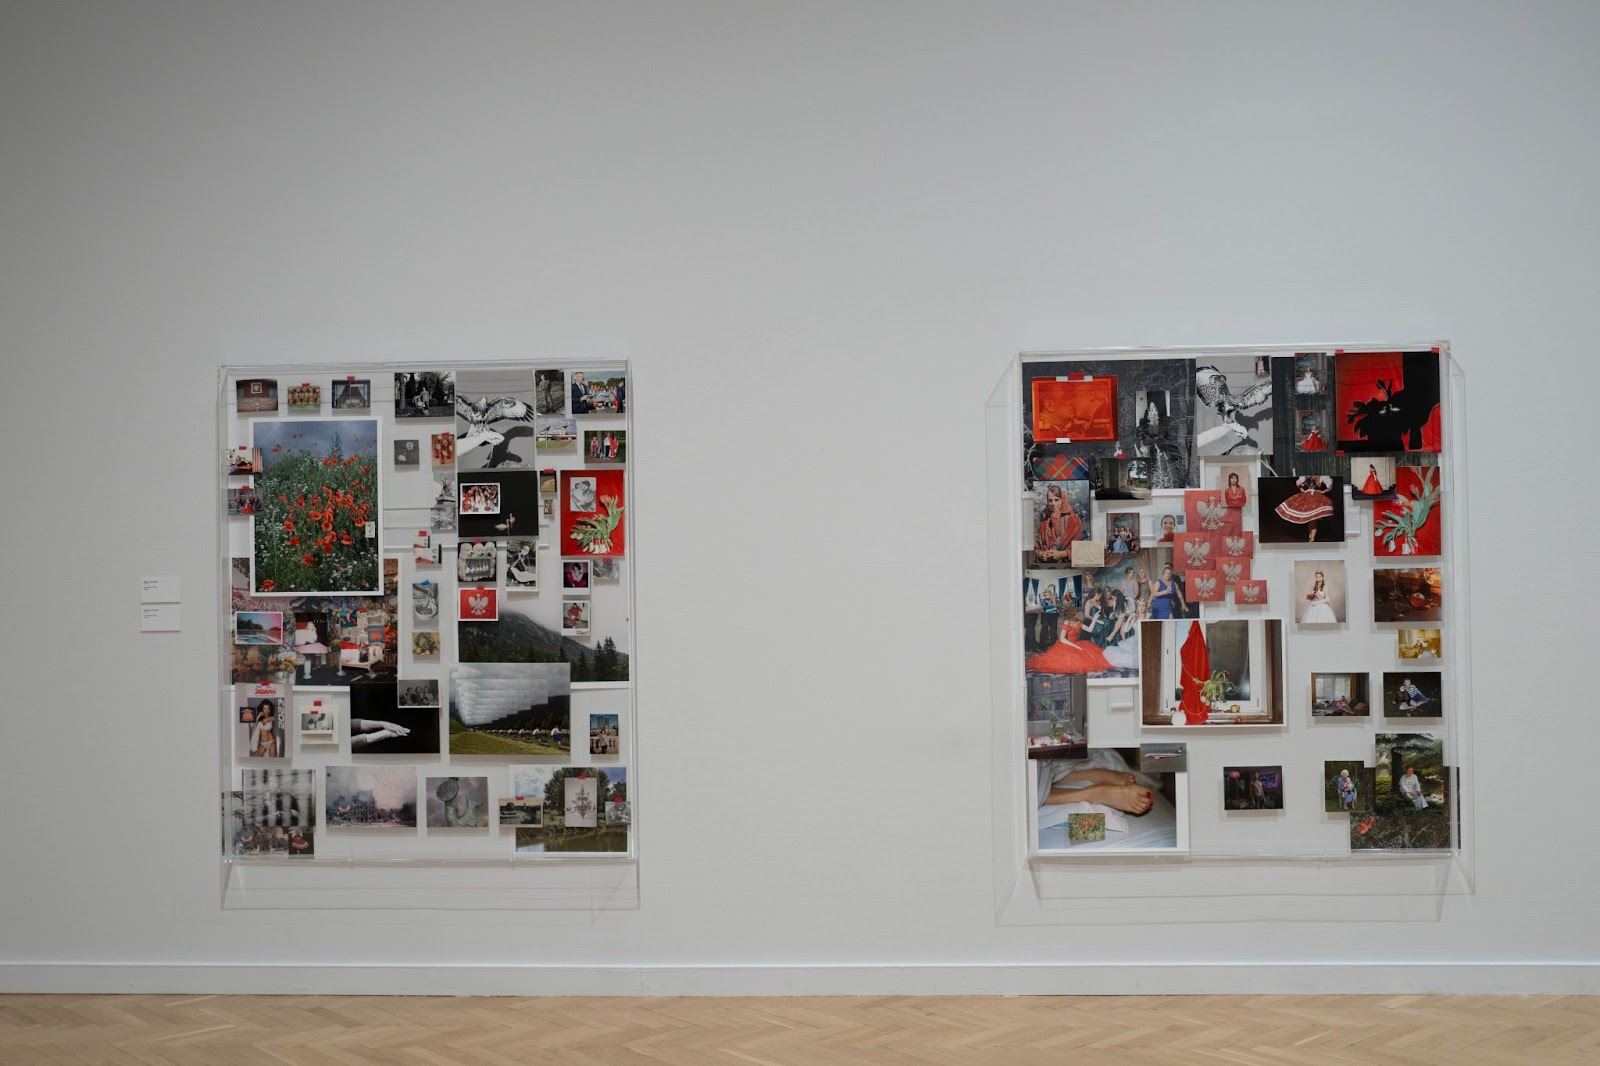 Image: Installation view, two collages by Marzena Abrahamik at the Chicago Cultural Center. The collages are two large glass frames hung against white walls with printed-out images organized and taped onto them. Courtesy of Villa Albertine.